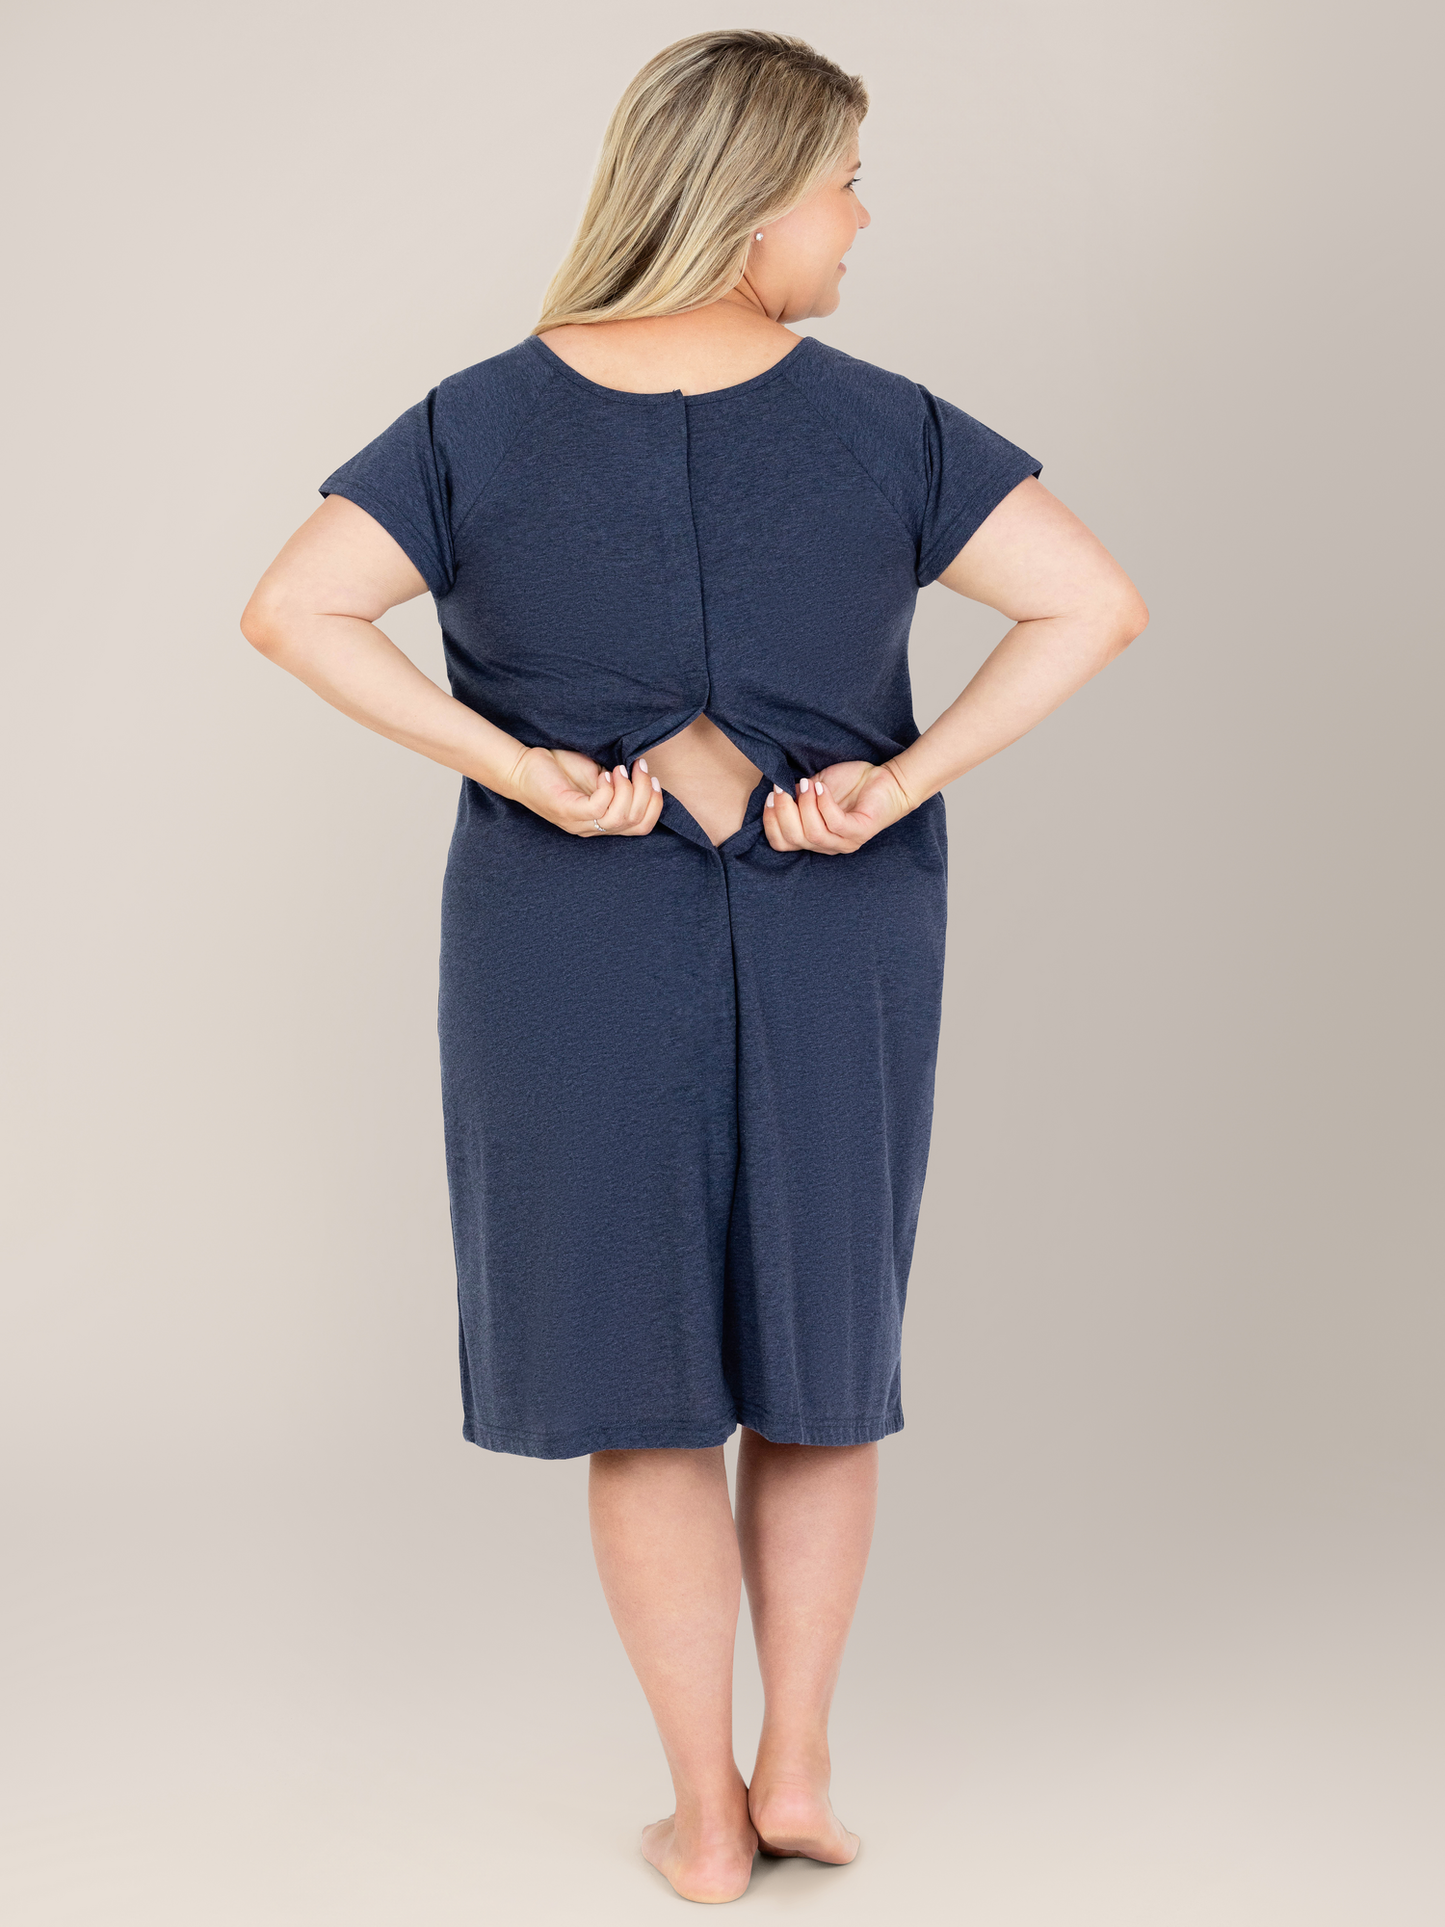 Back view of a pregnant model showing the easy back access on the Universal Labor & Delivery Gown in Navy Heather